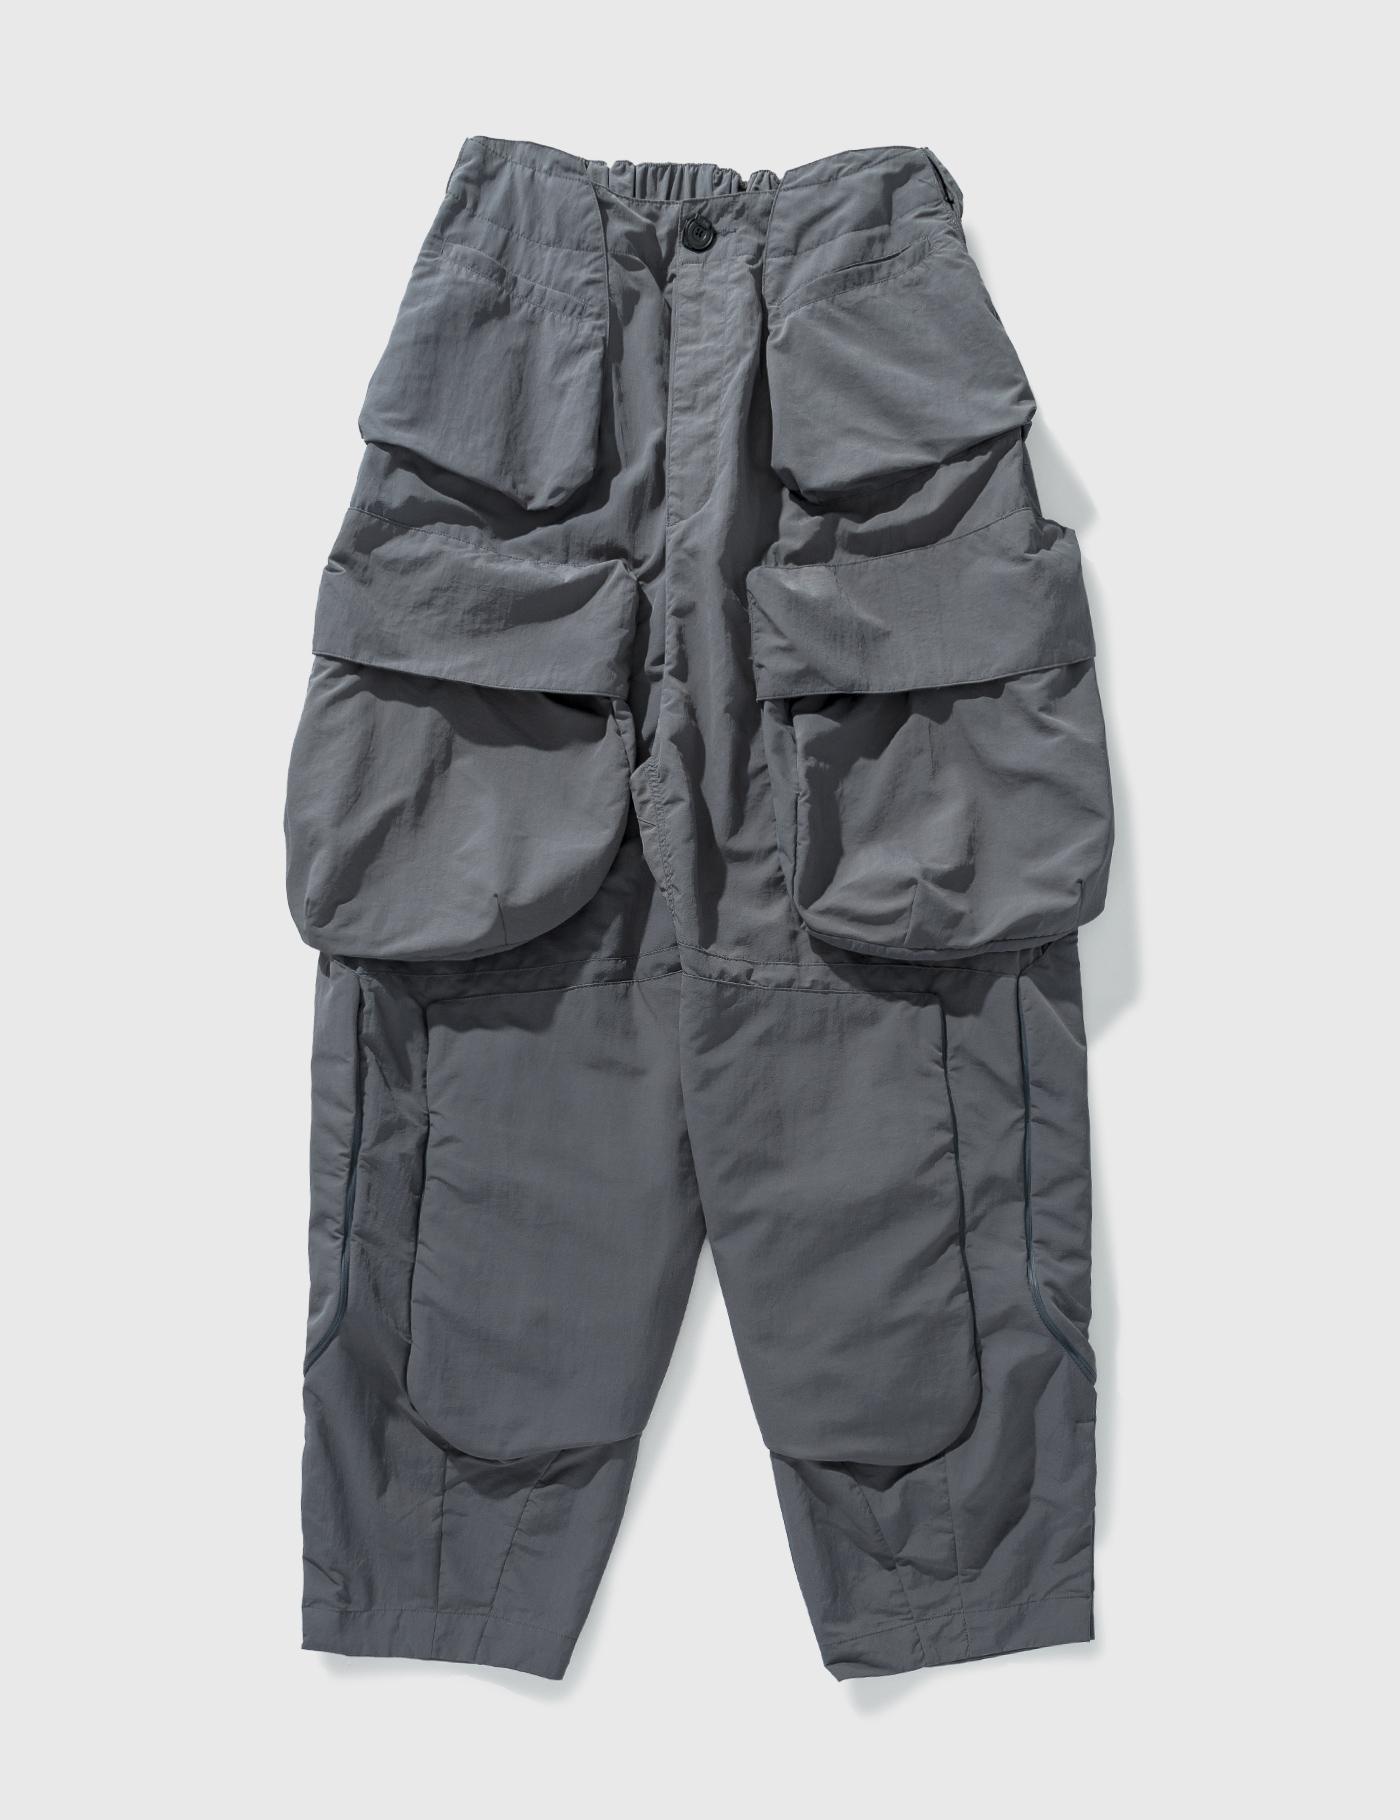 TEFLON® Switchable Cover Pants by ARCHIVAL REINVENT